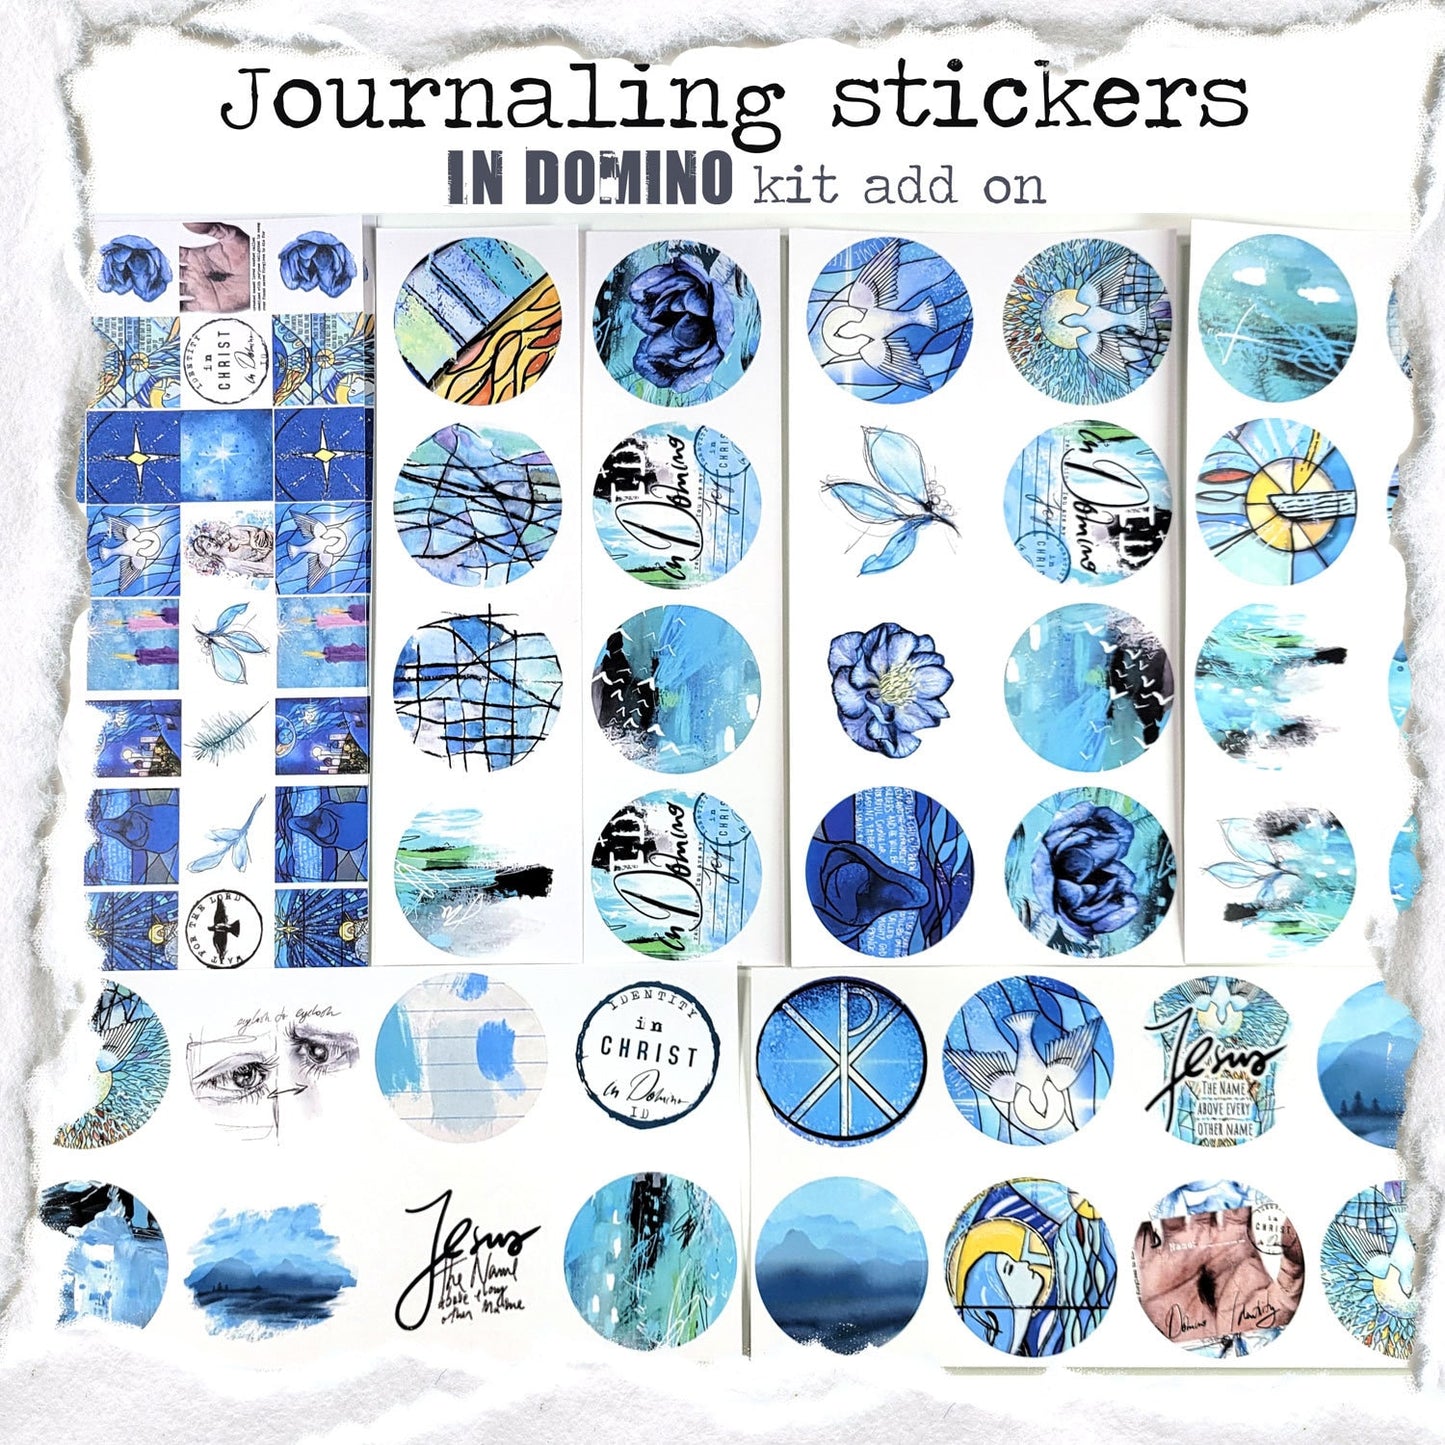 ID In Domino- ADD ON 88 journaling stickers